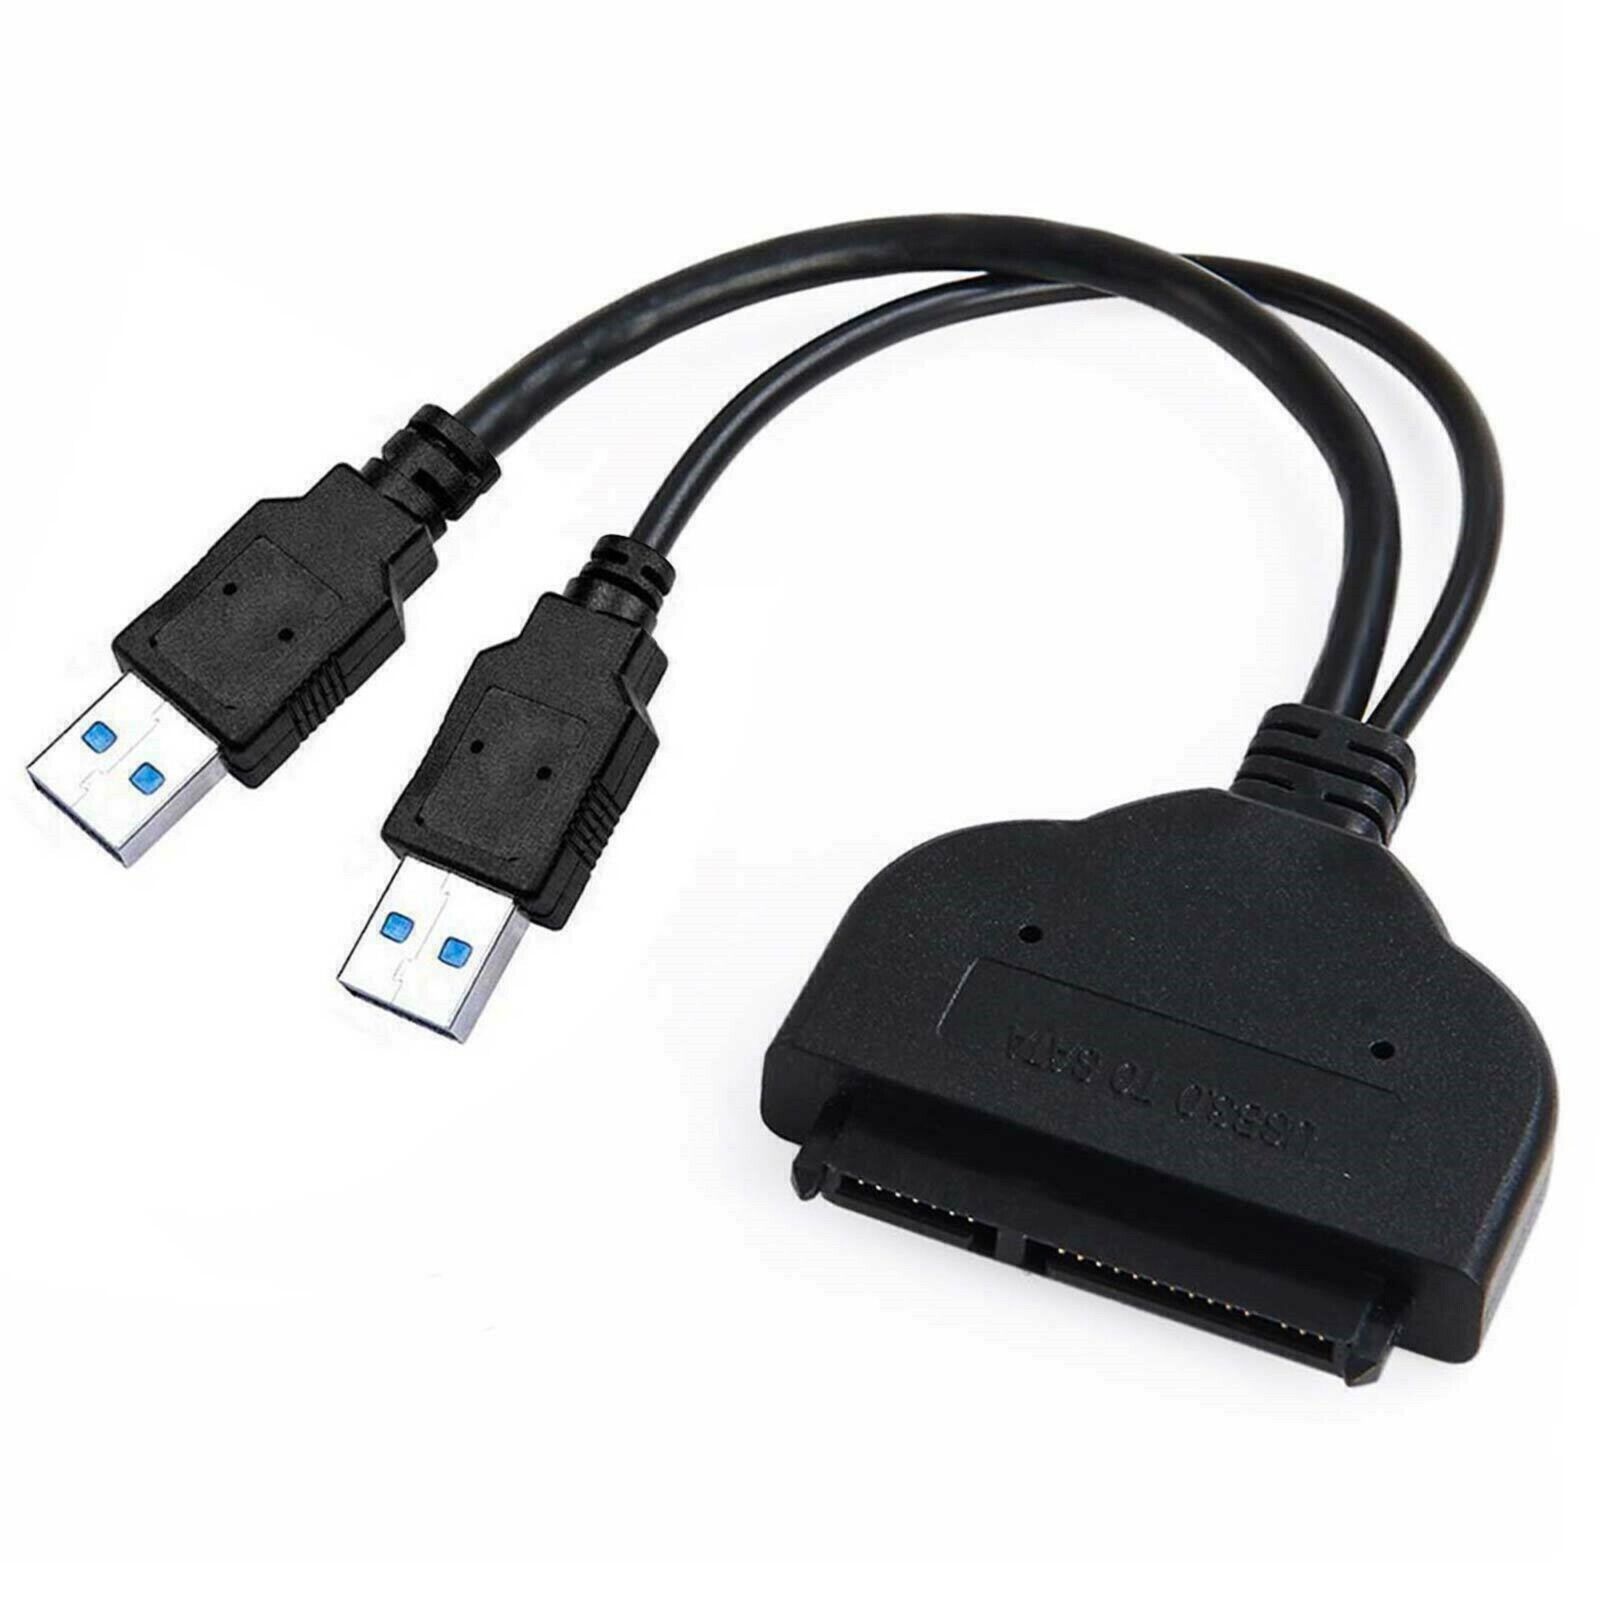 USB 3.0 to SATA 2.5 External Hard Disk Drive Adapter Cable